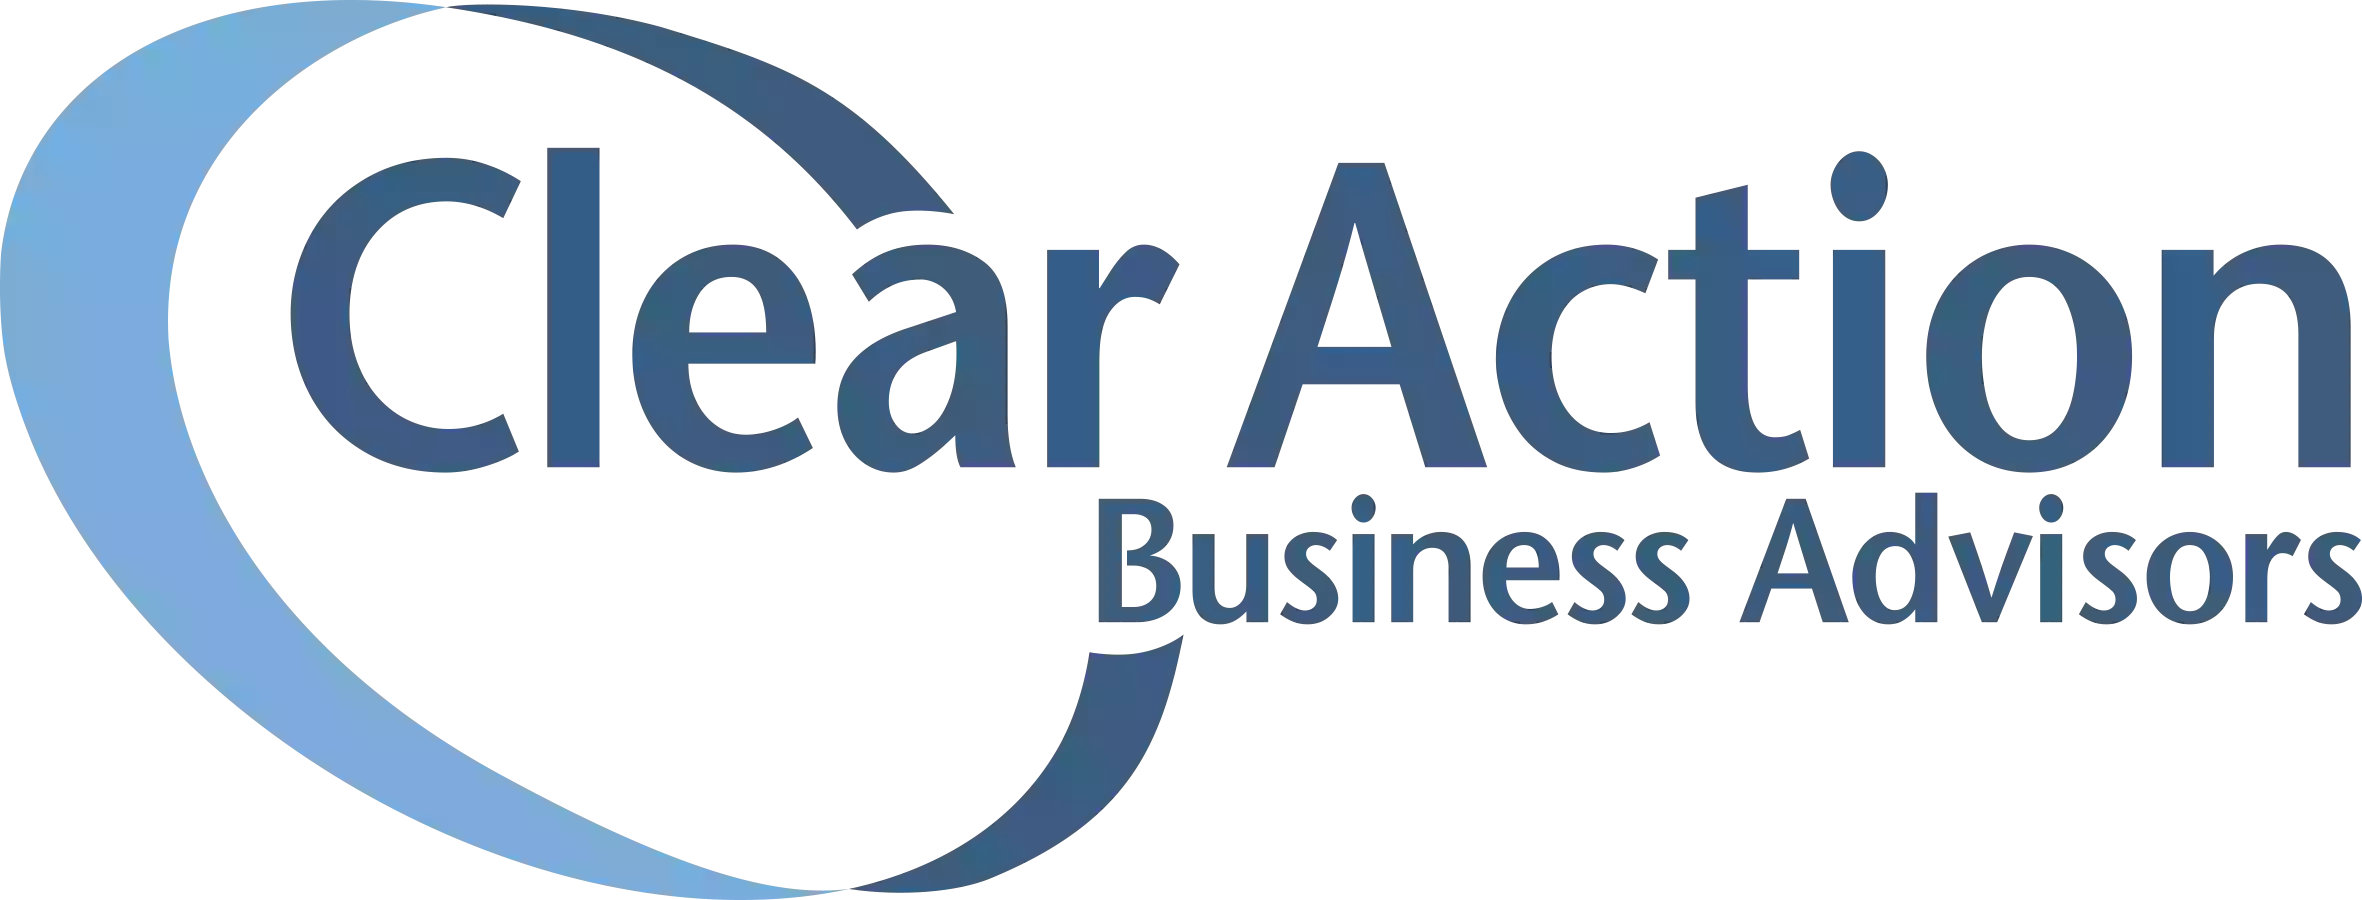 Clear Action Business Advisors